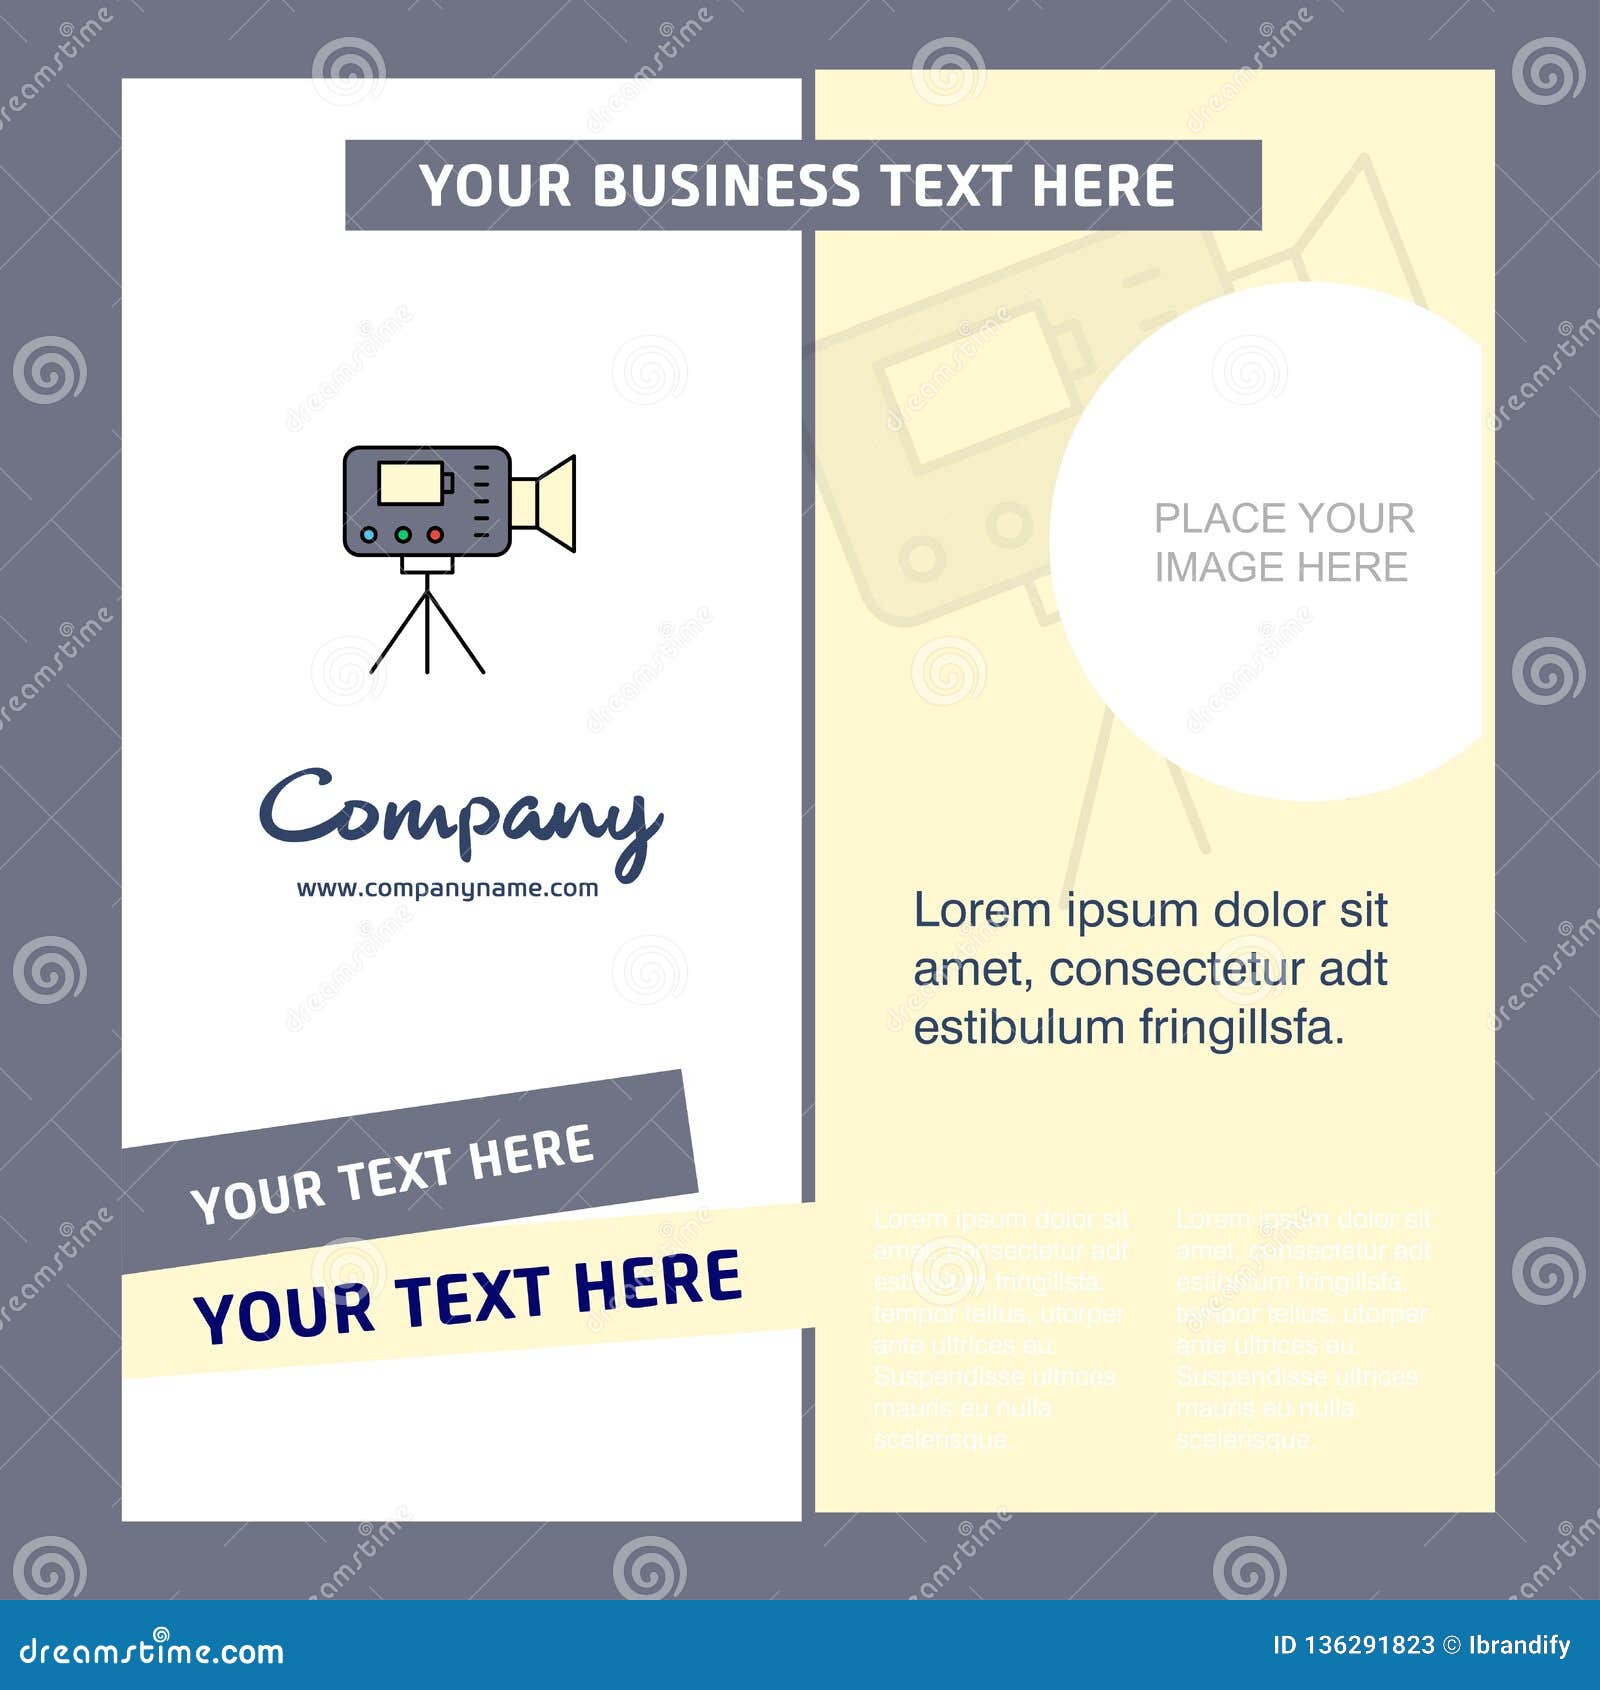 camcoder company brochure template.  busienss template